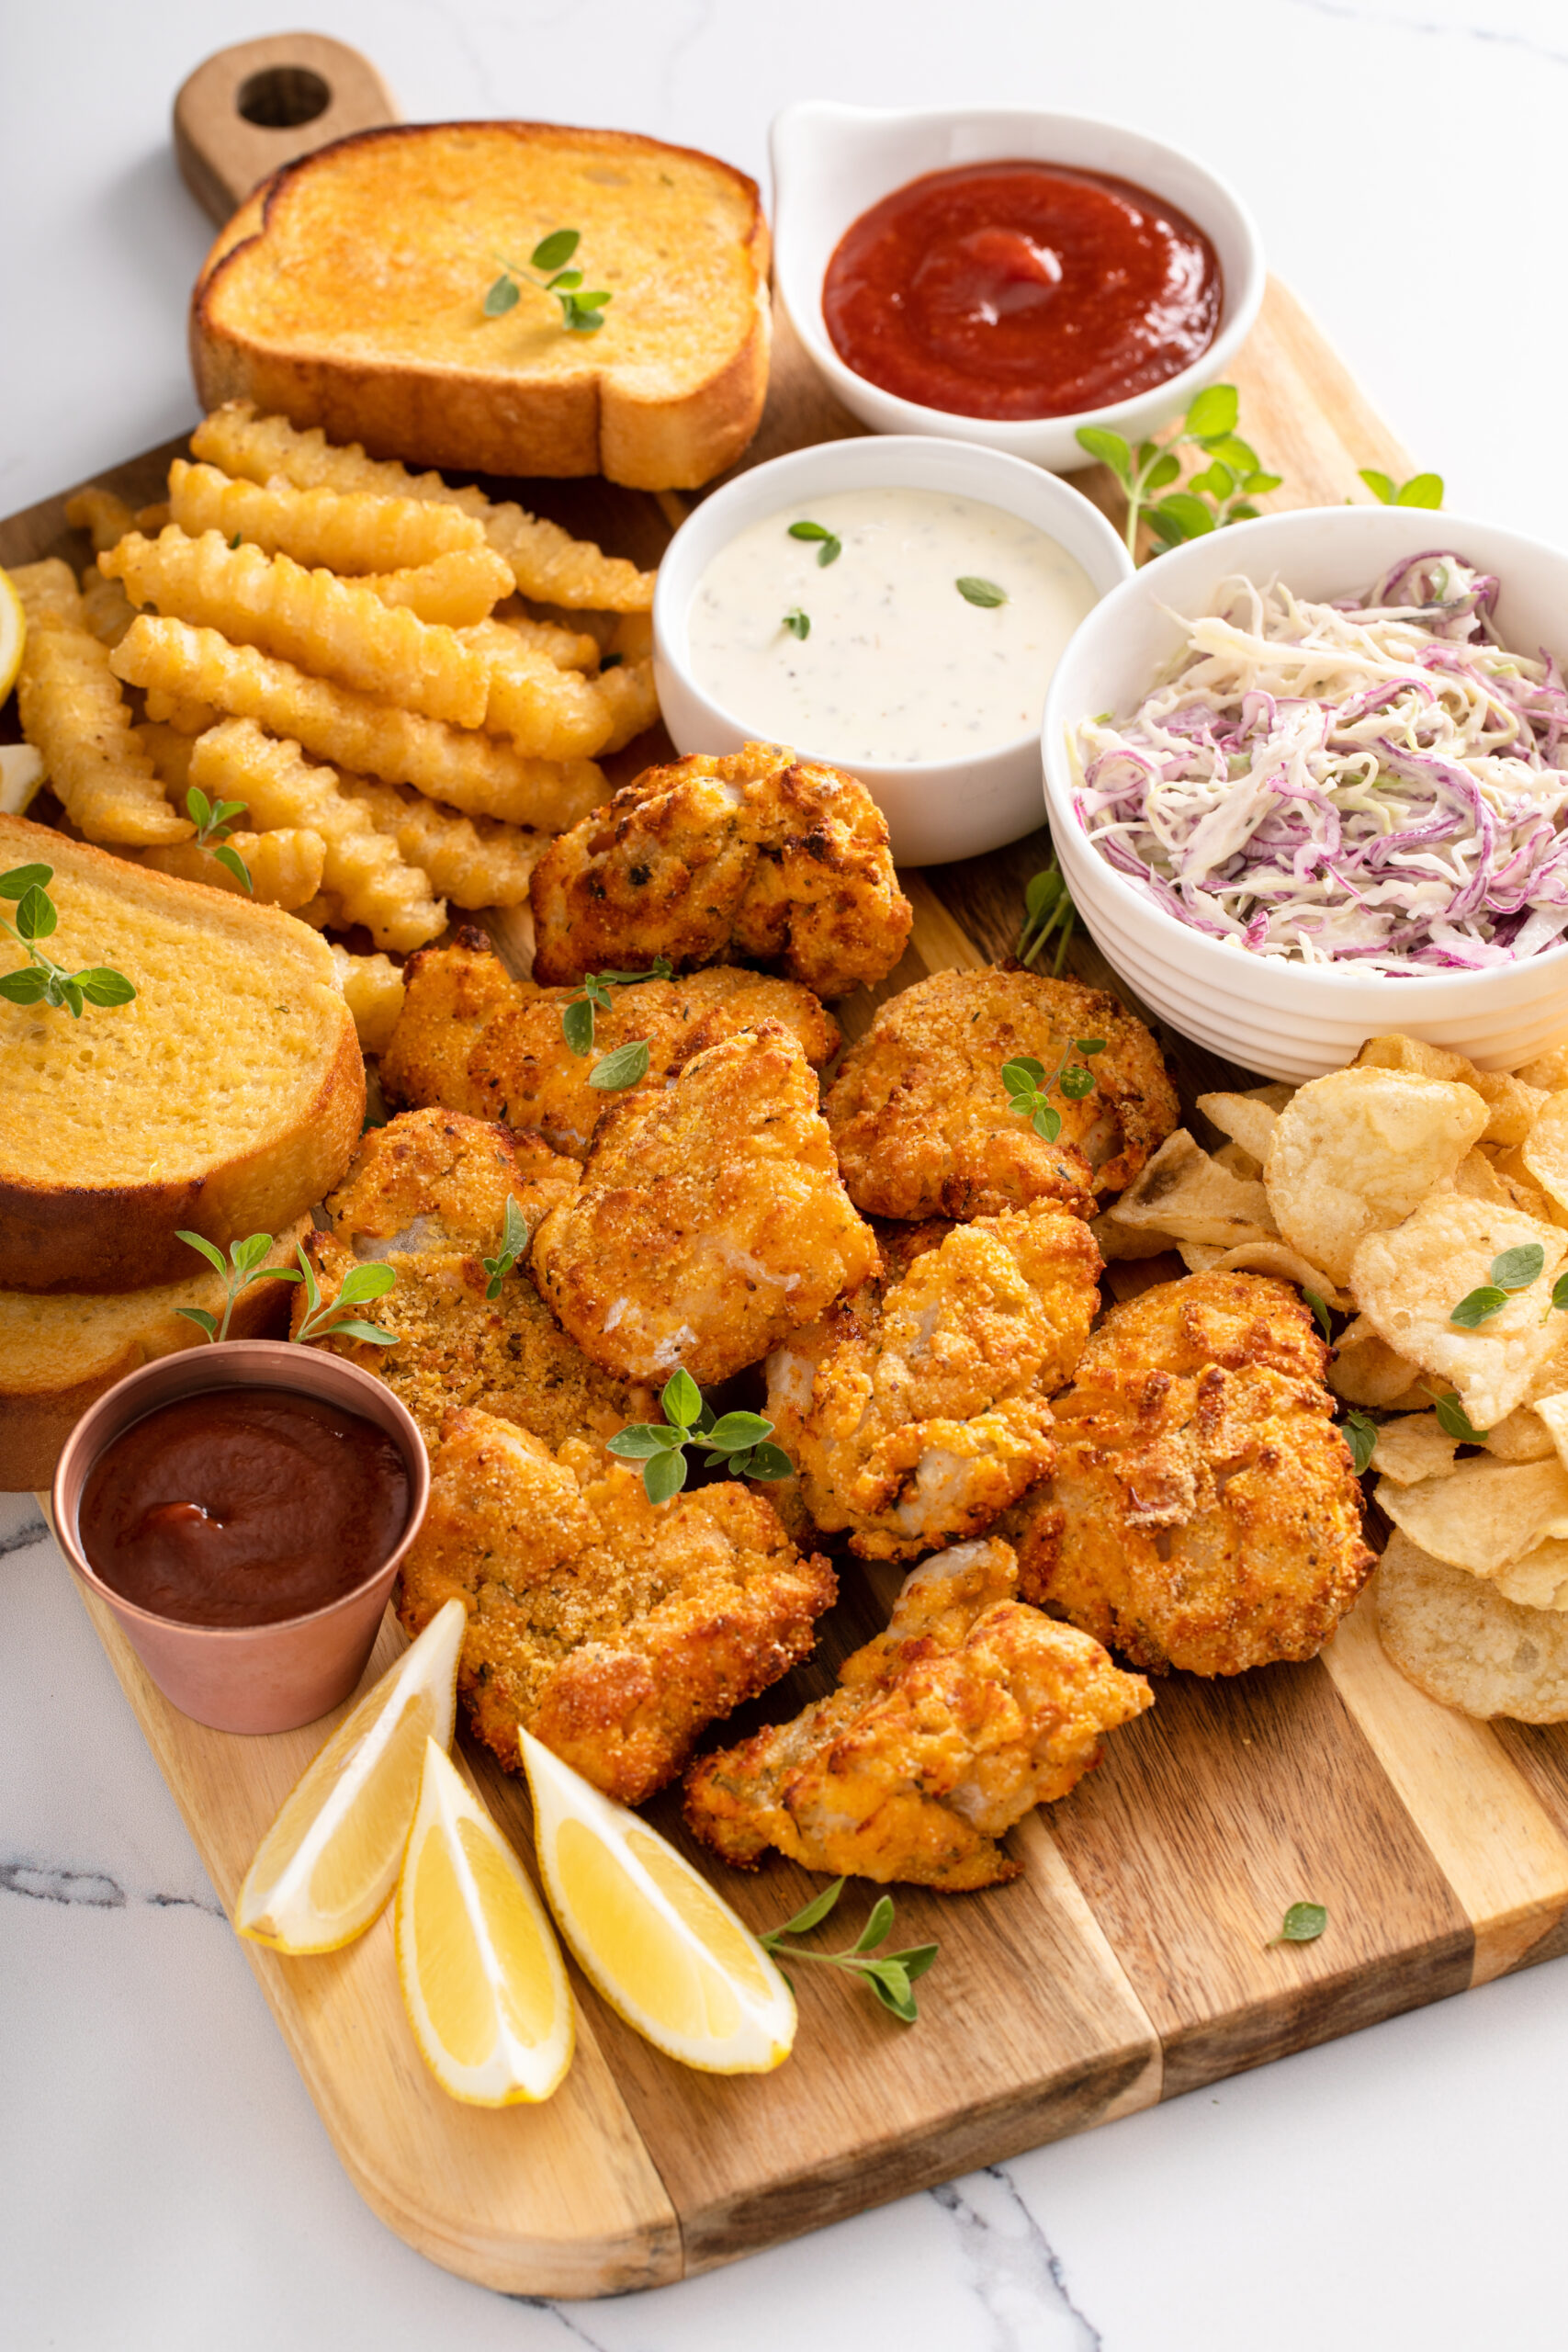 Looking for the perfect catfish board? Click HERE to make the best USA farm raise catfish board you will ever try!